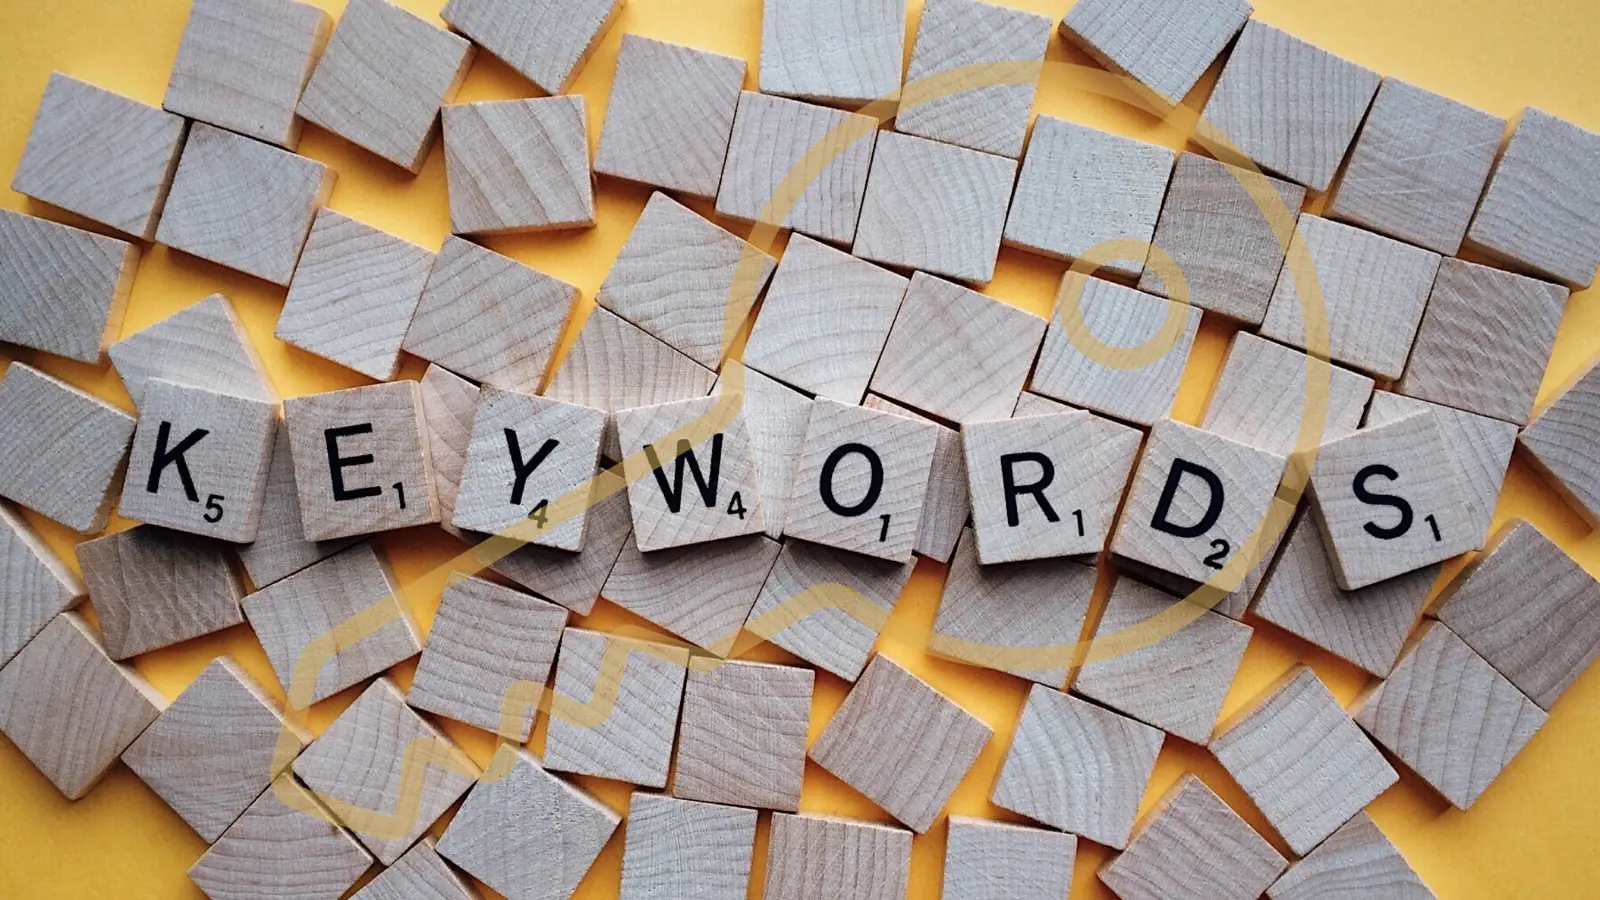 importance of keyword research